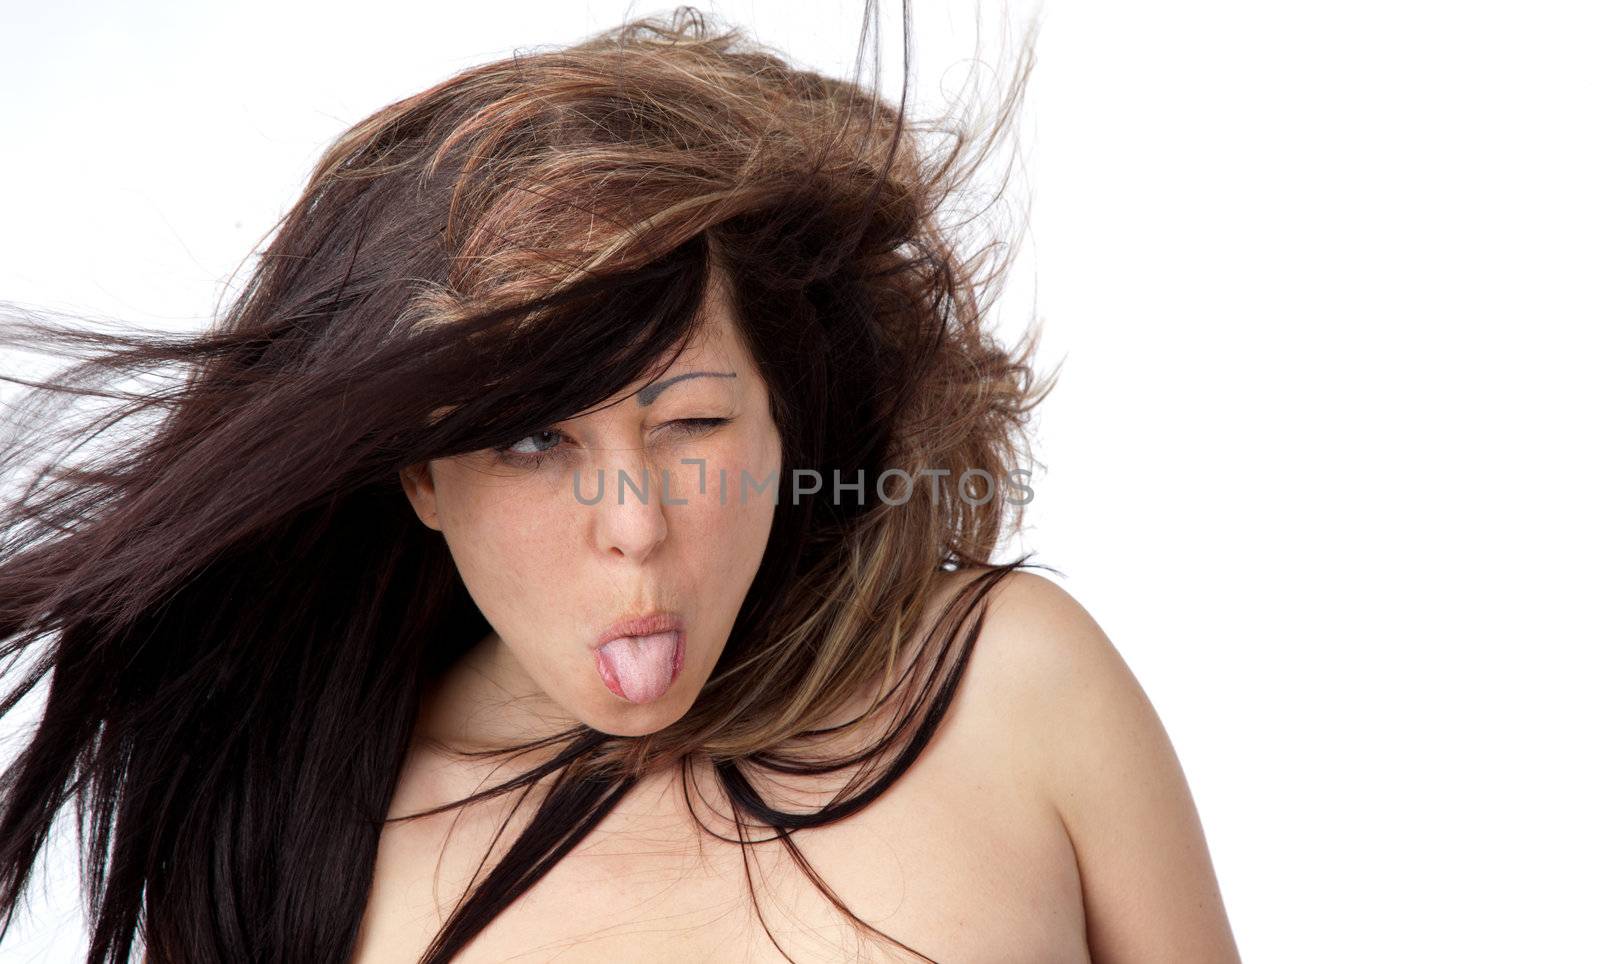 Topless woman tongue out by vilevi